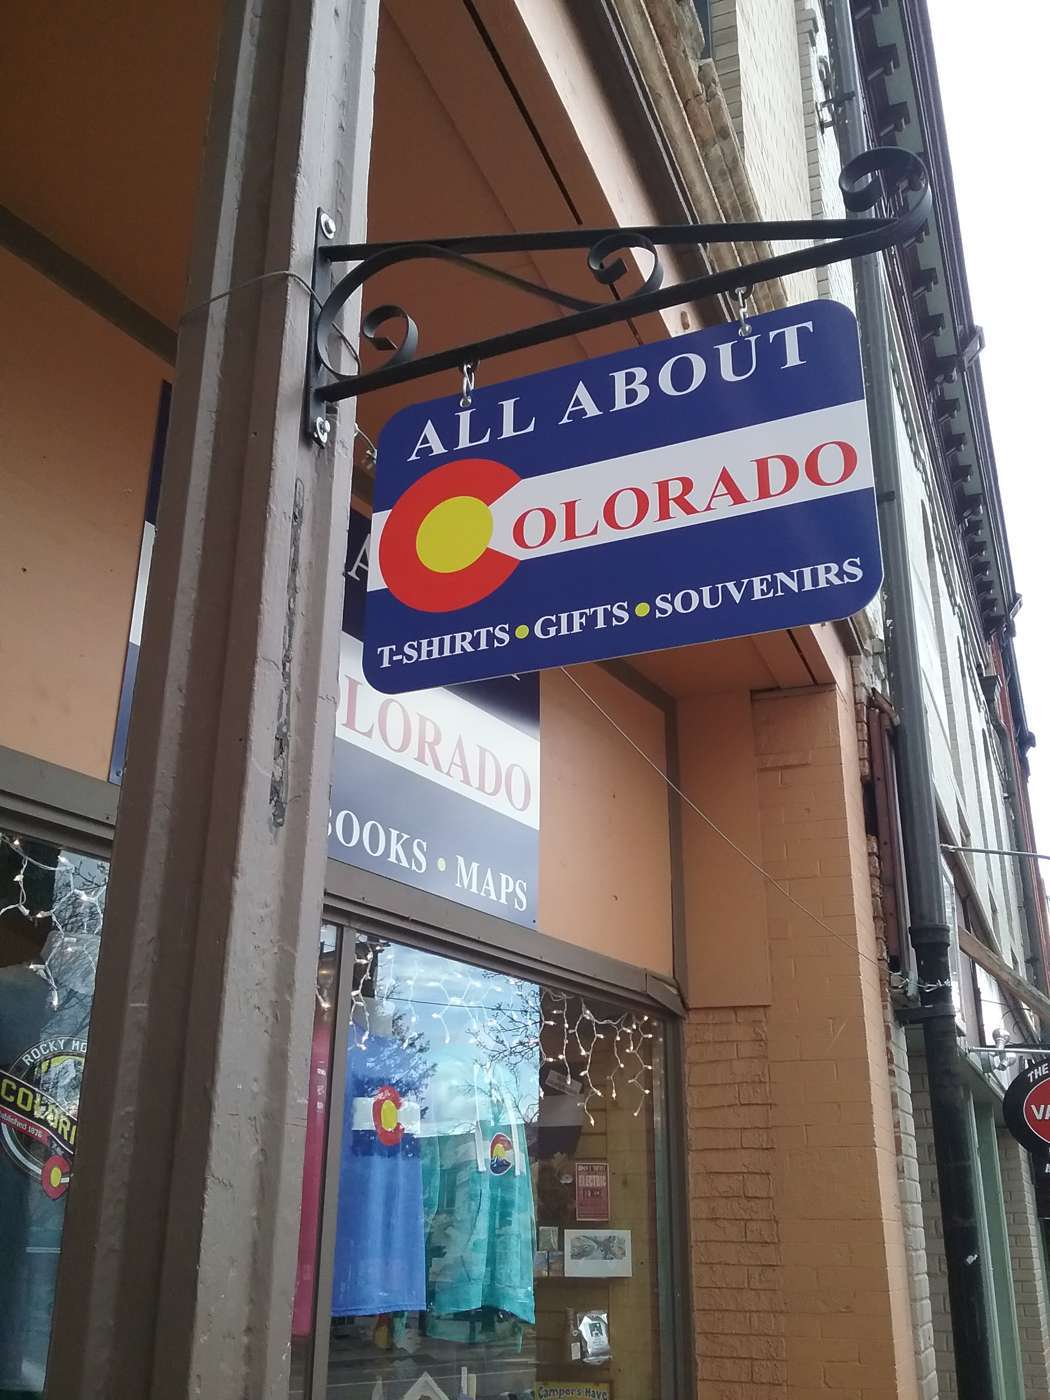 All About Colorado